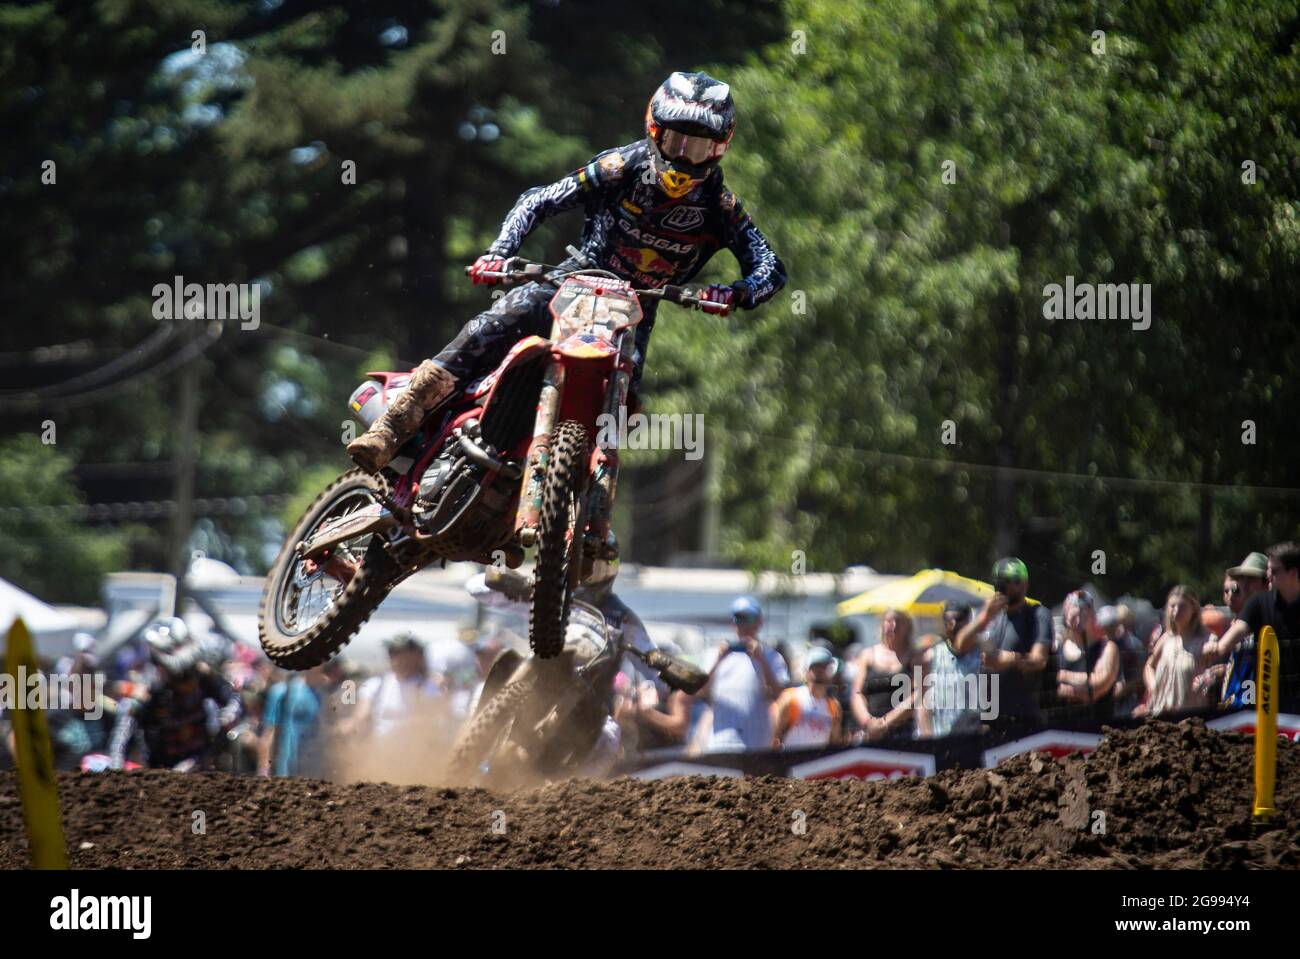 JUL 24 2021 Washougal, WA USA Troy Lee Designs/ Red Bull/ GASGAS Factory Racing Pierce Brown(45) gets air between sections 34-35 during the Lucas Oil Pro Motocross Washougal Championship 250 class moto # 1 at Washougal MX park Washougal, WA Thurman James/CSM Stock Photo